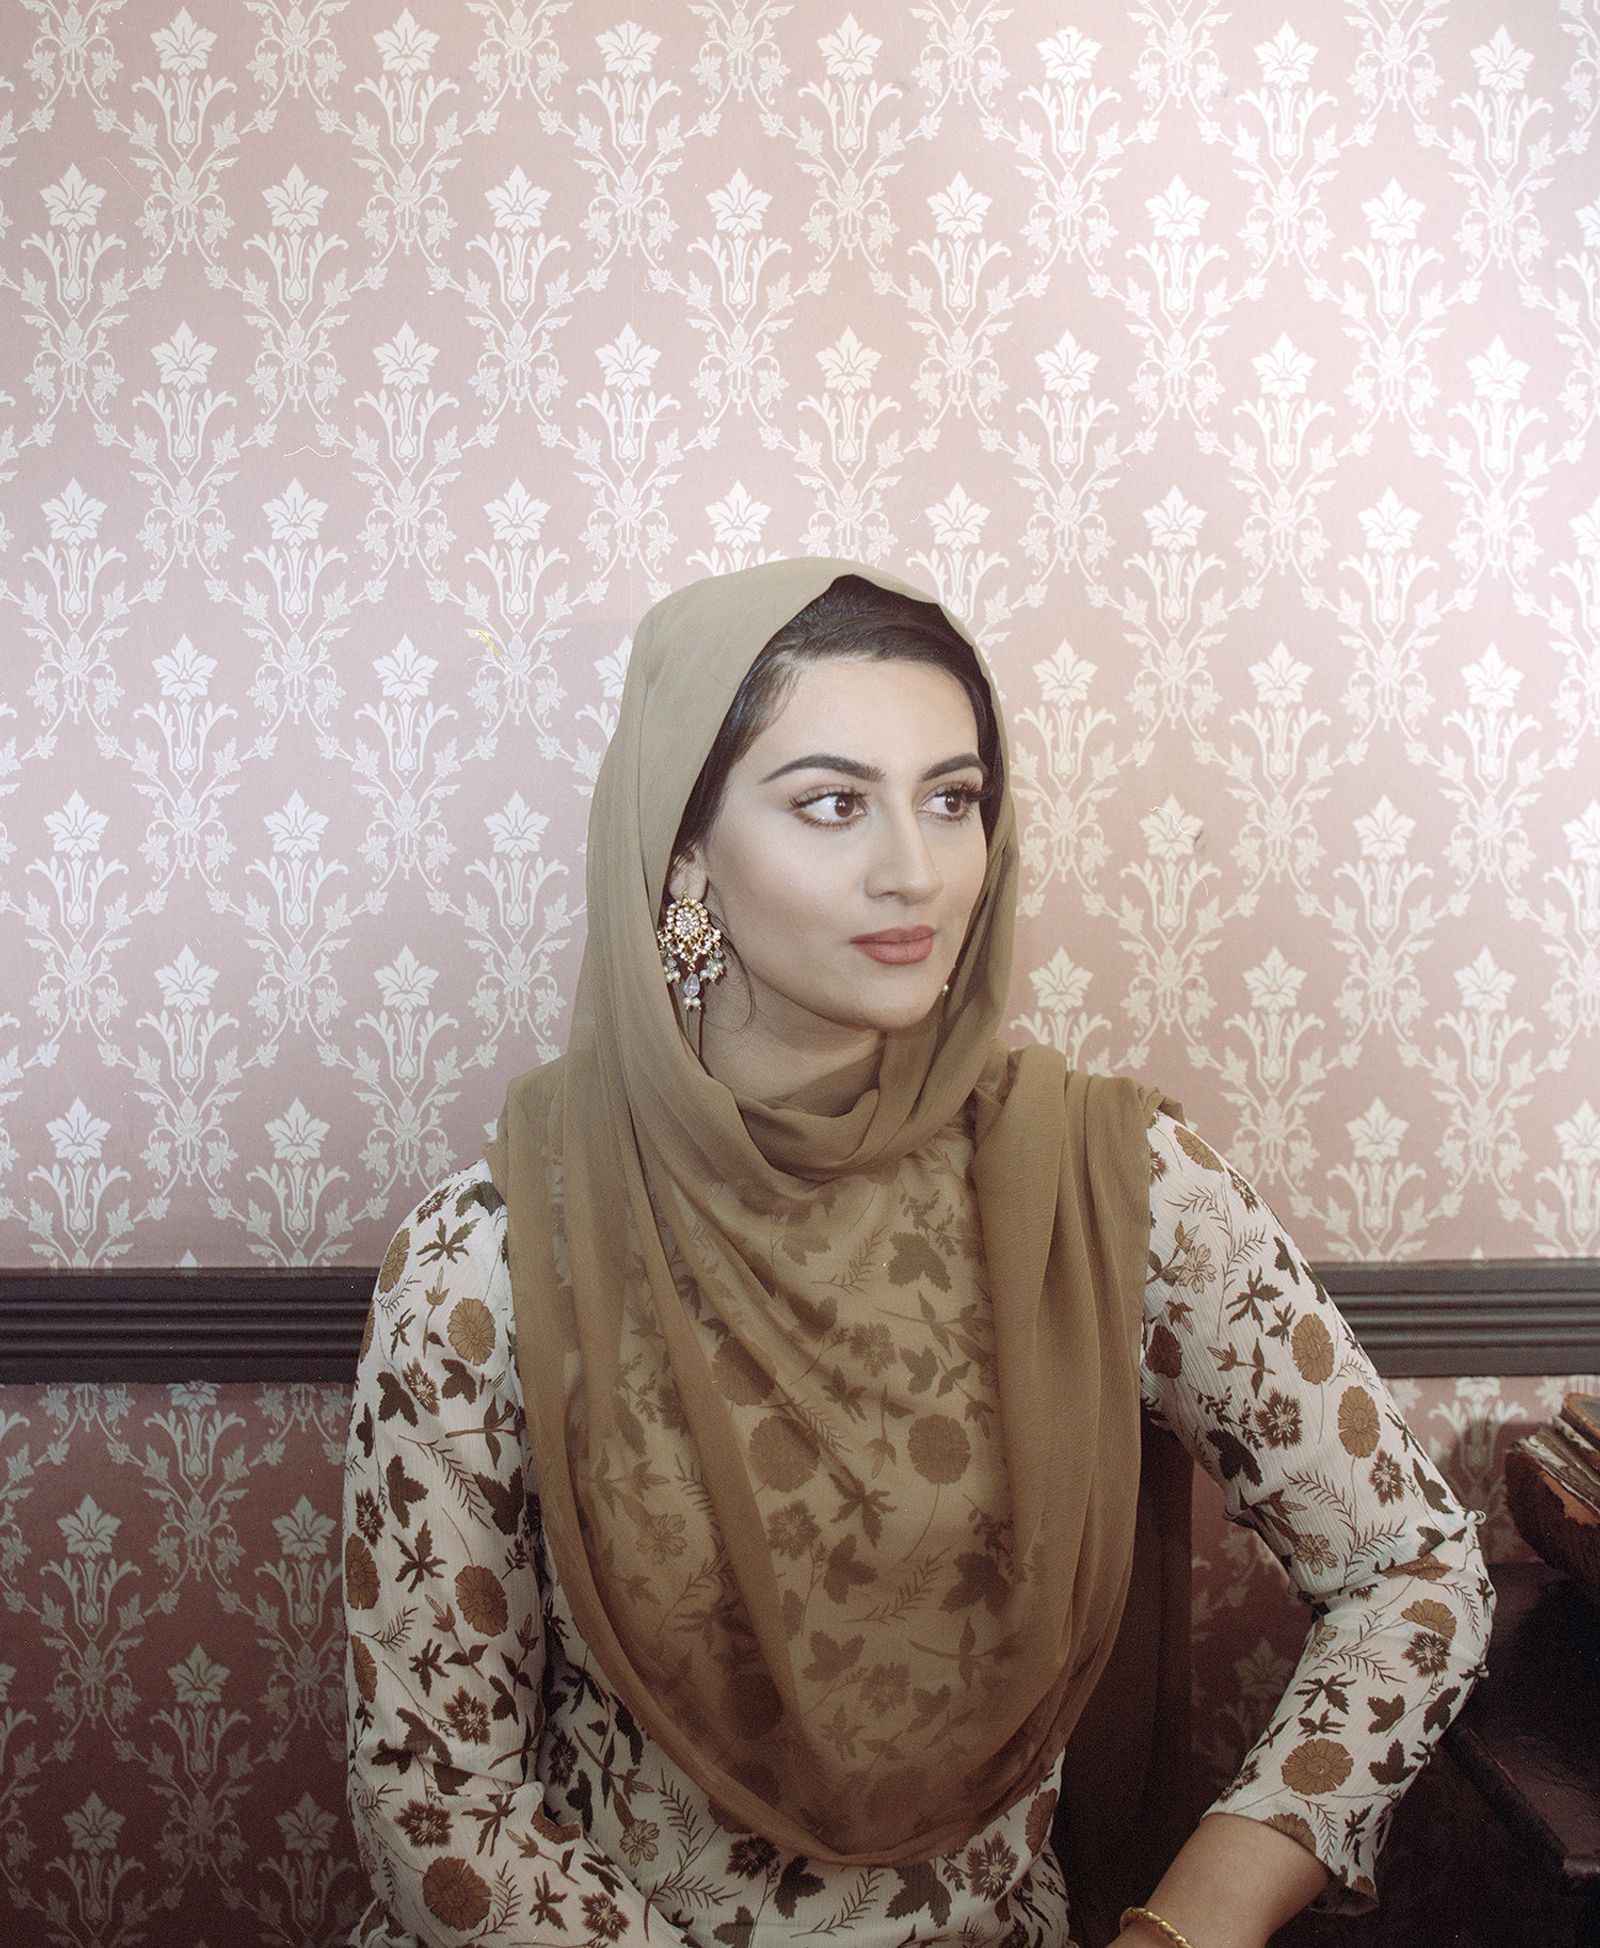 © Maryam Wahid - Image from the Women From The Pakistani Diaspora In Britain photography project